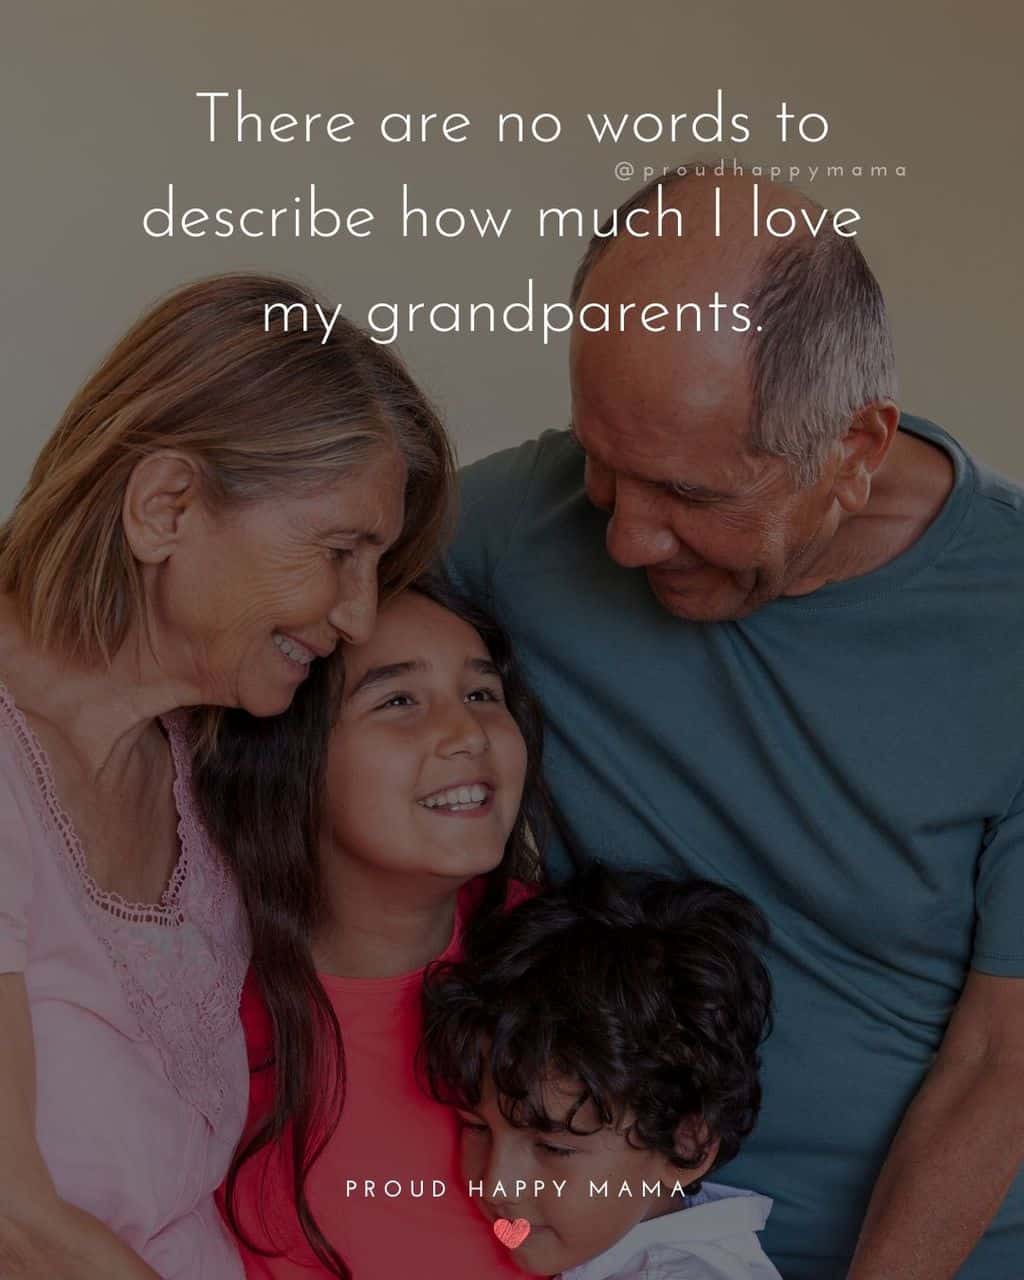 Grandparent Quotes – There are no words to describe how much I love my grandparents.’